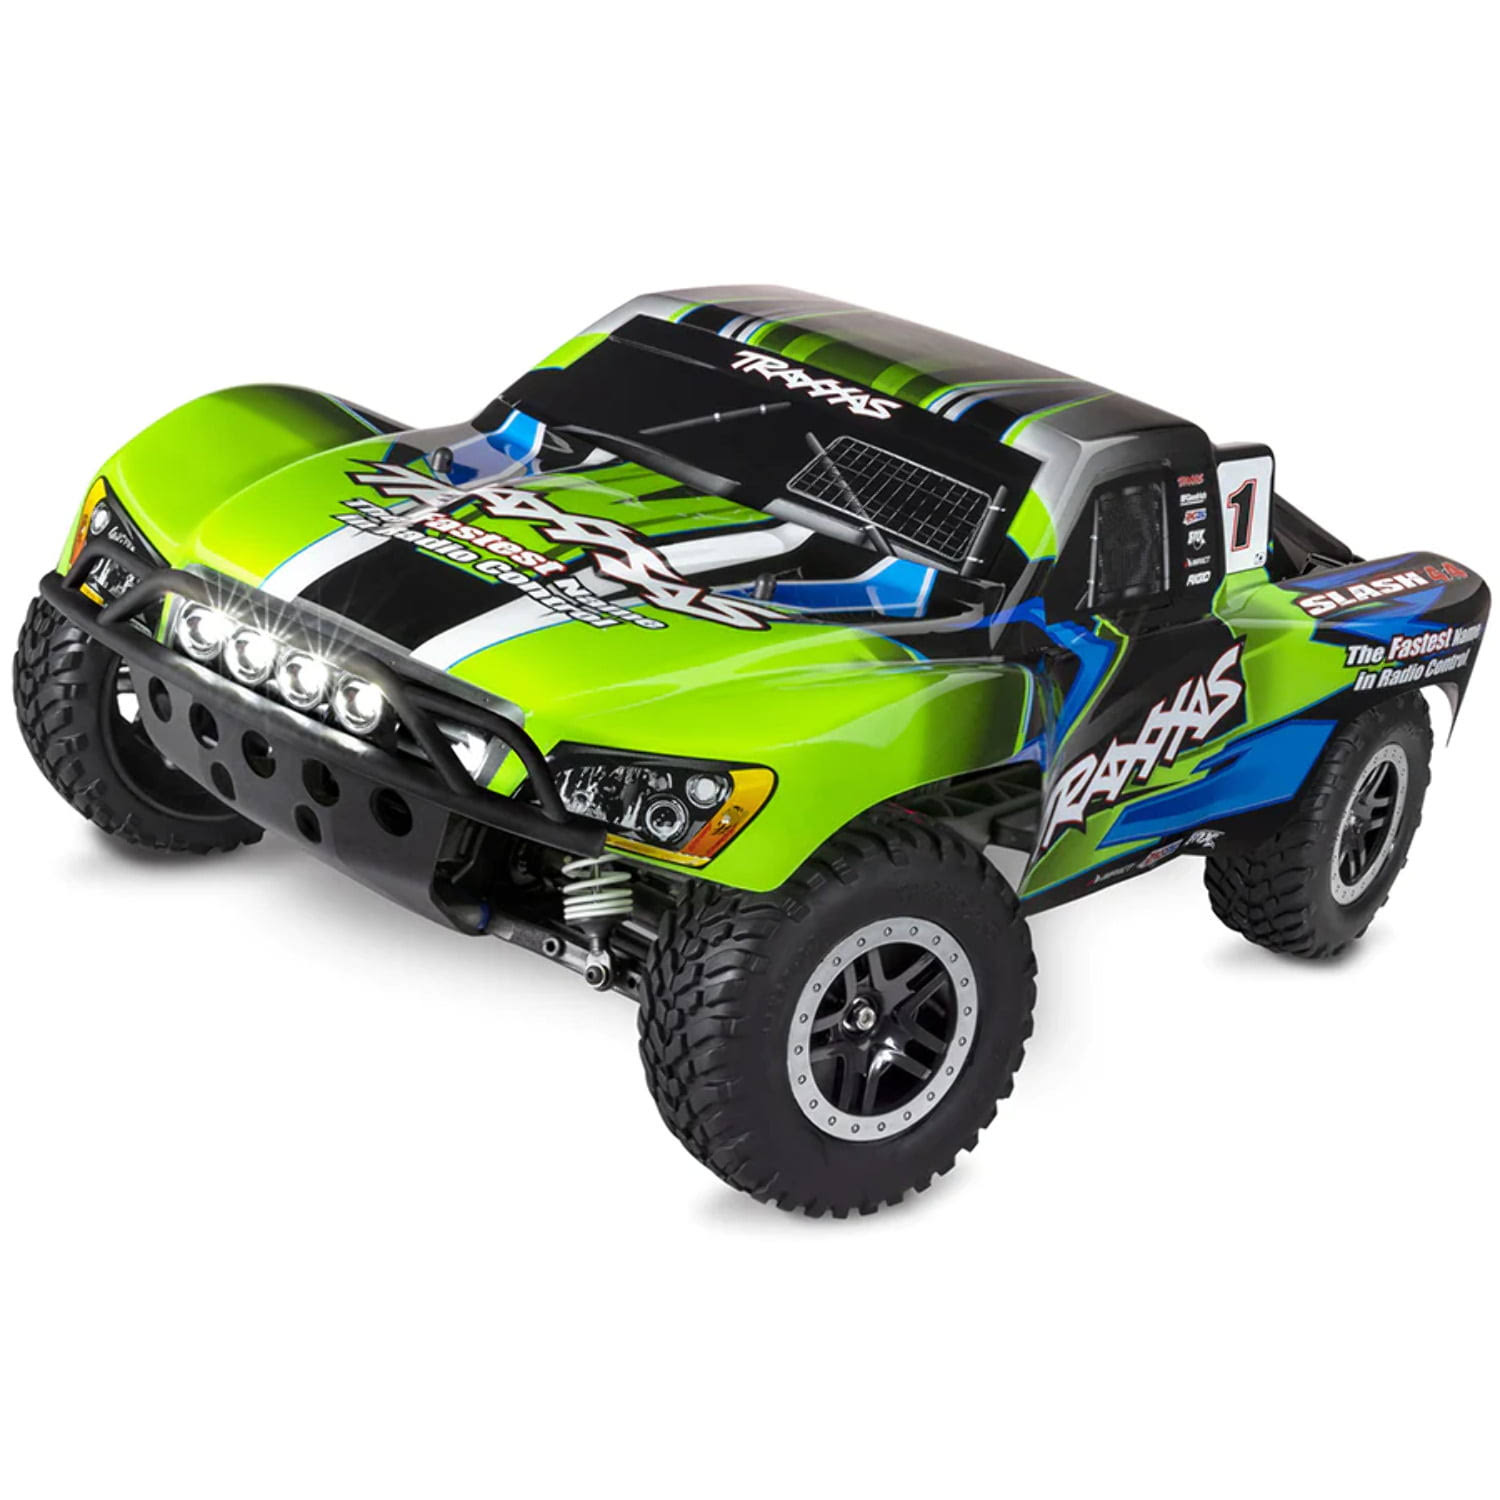 Traxxas Slash 4x4 RTR 4WD Brushed Short Course Truck (Green) w/LED Lights